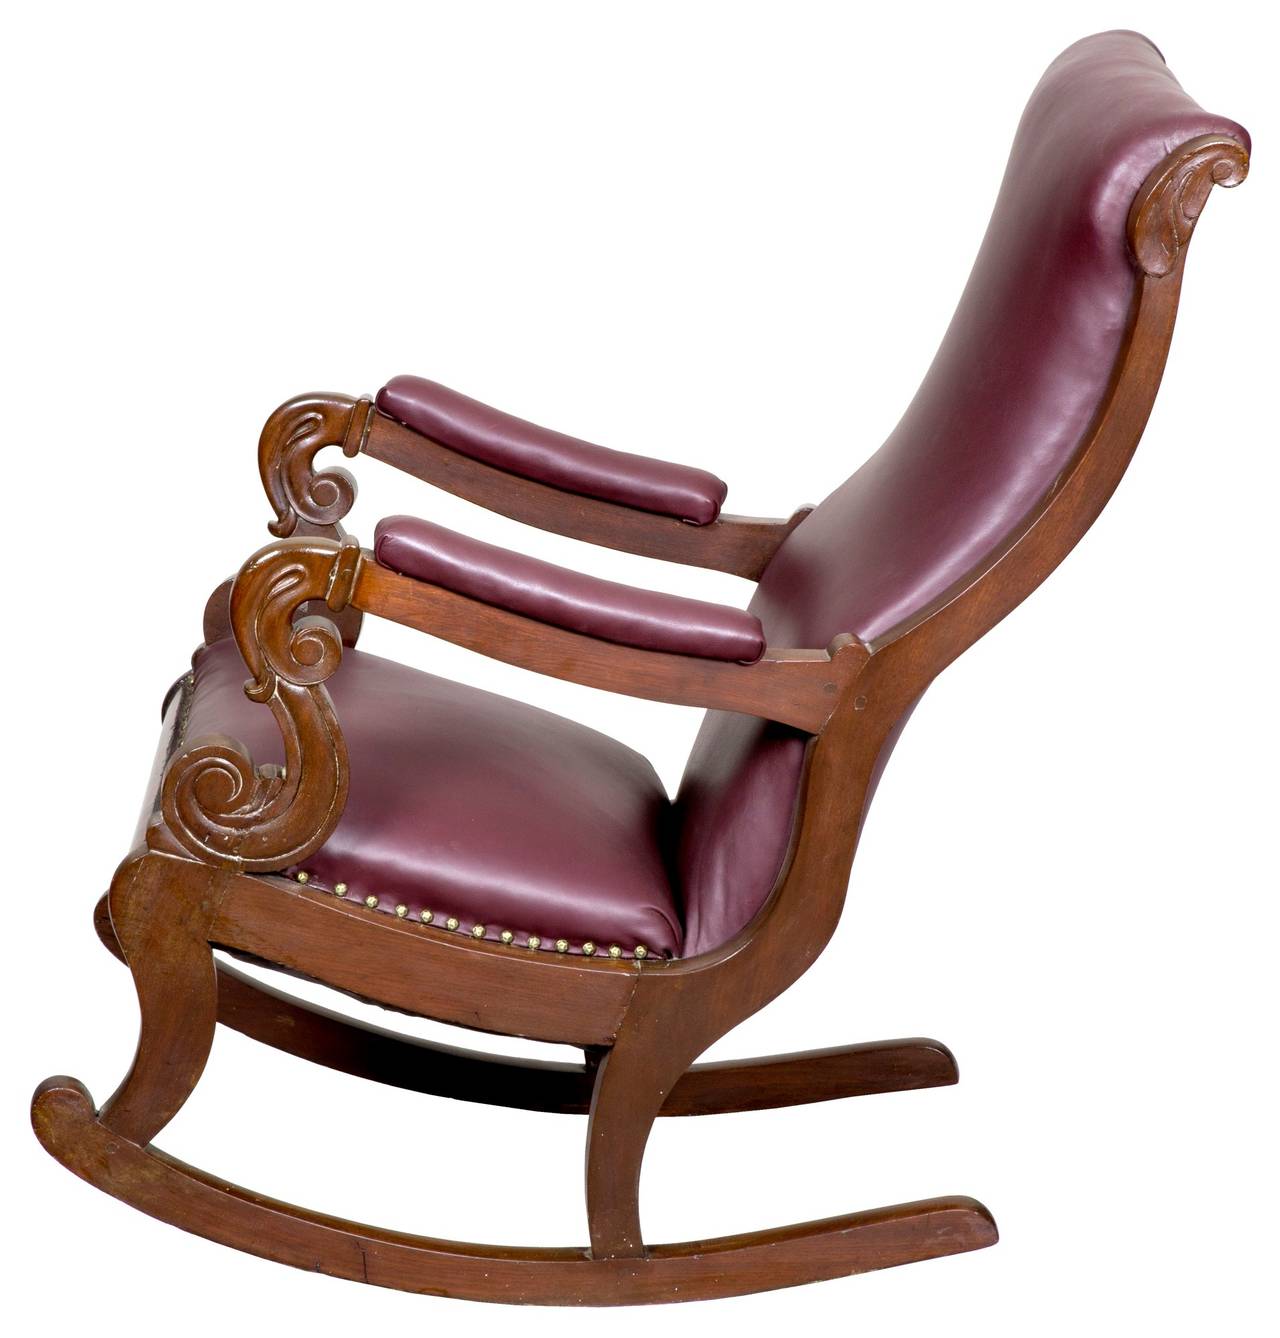 American Classical Mahogany Rocker with Carved Scrolled Arm Supports For Sale